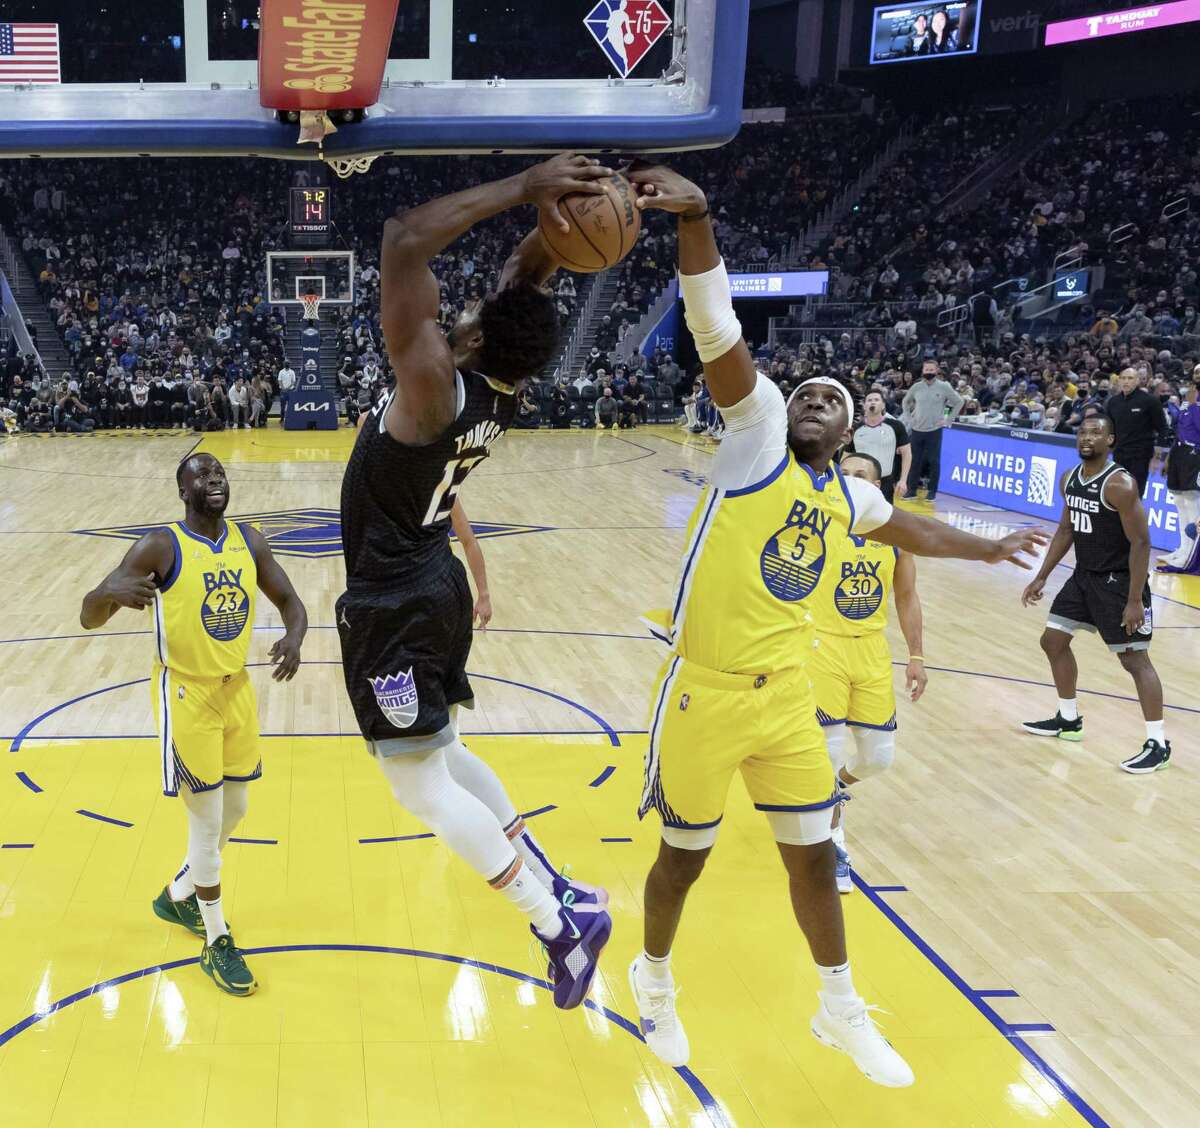 Kevon Looney (5) blocks a shot by Tristan Thompson (13) in the first half as the Golden State Warriors played the Sacramento Kings at Chase Center in San Francisco, Calif., on Monday, December 20, 2021.